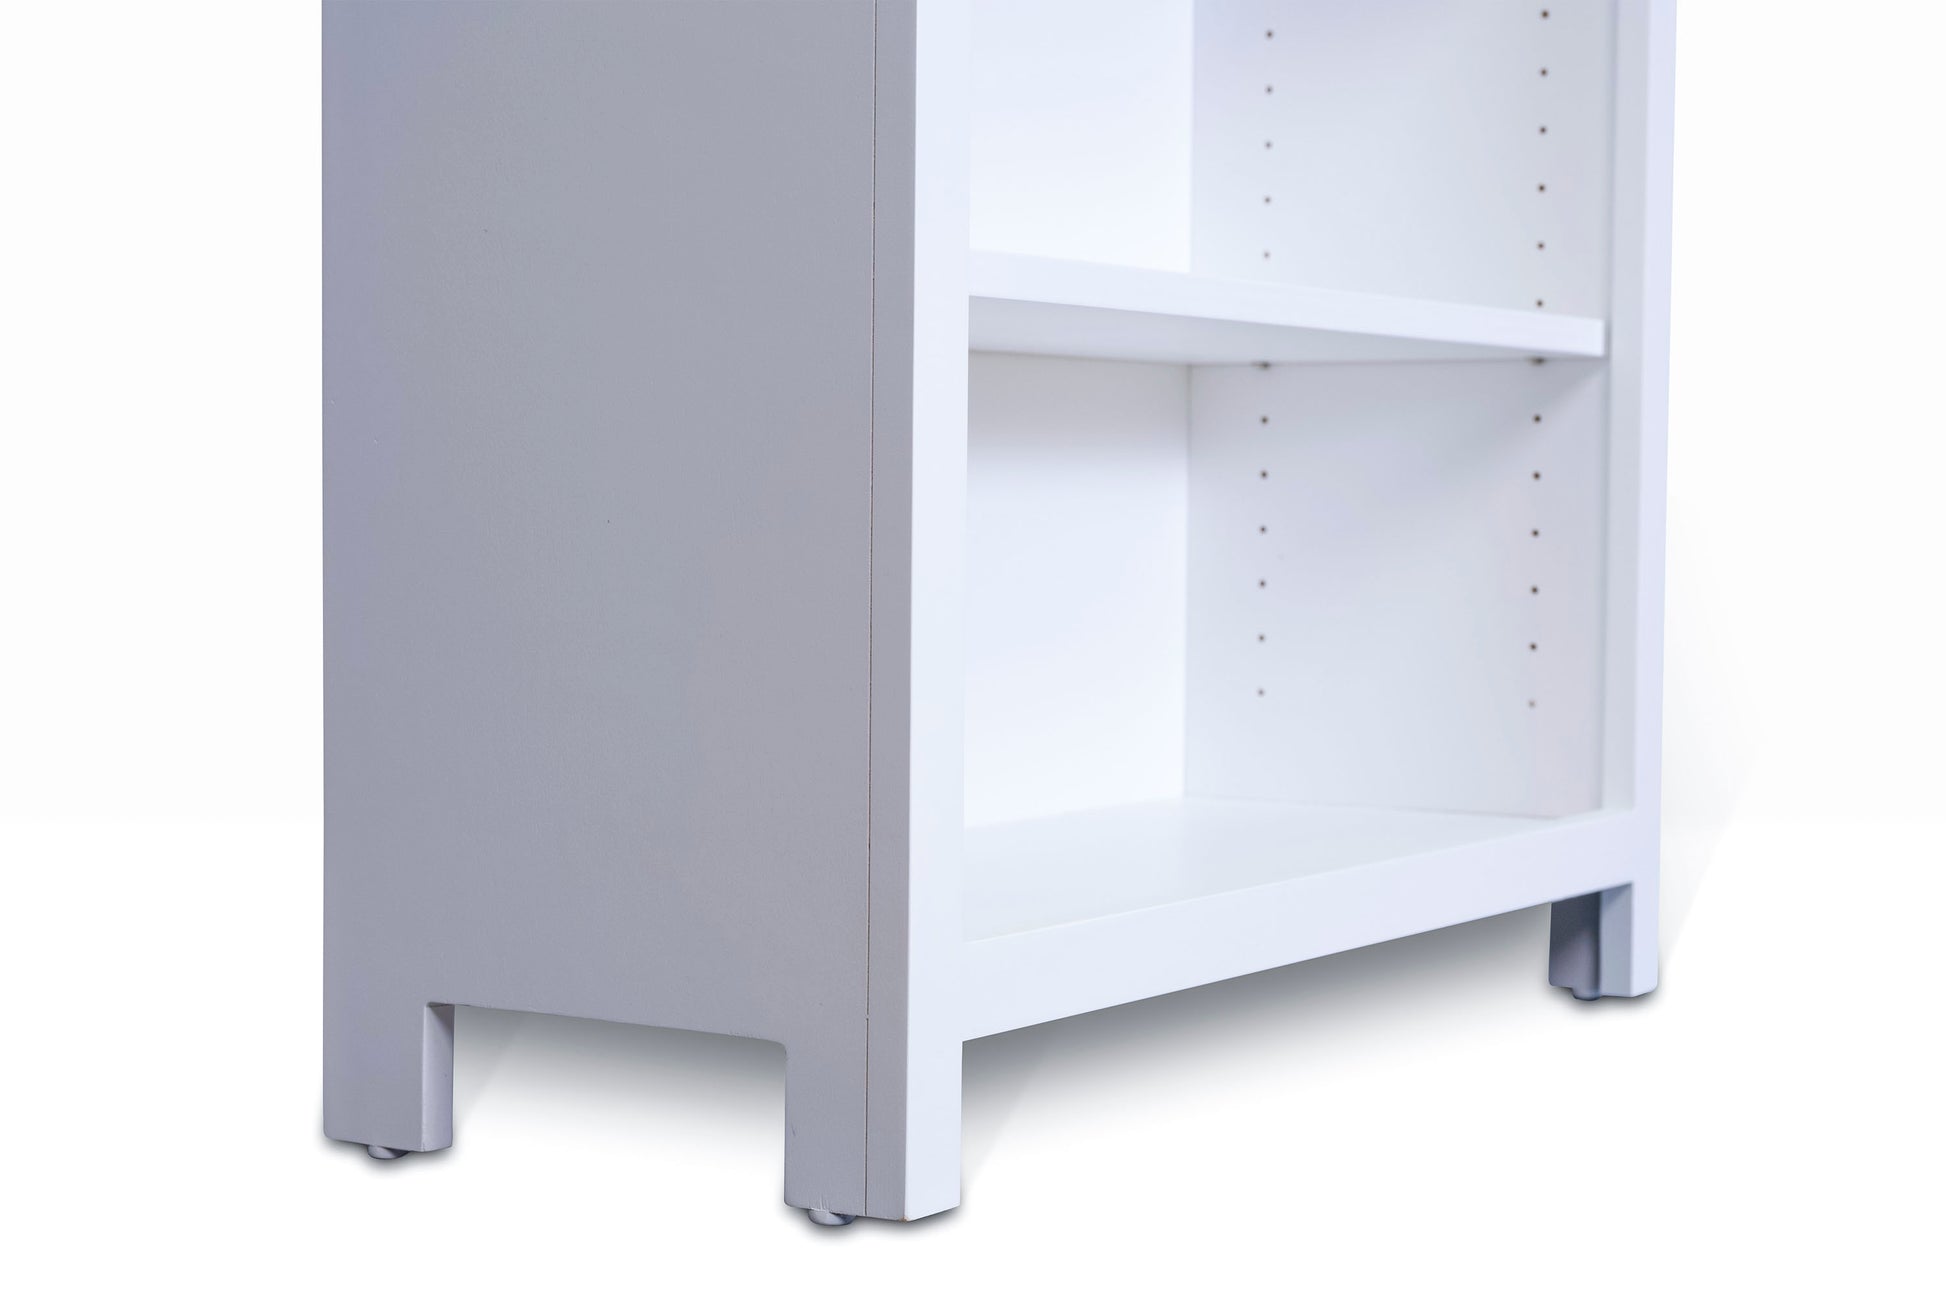 Acadia Tremont Bookcase is built in birch and features adjustable shelves. Shown close up to show details and the adjustable shelving.